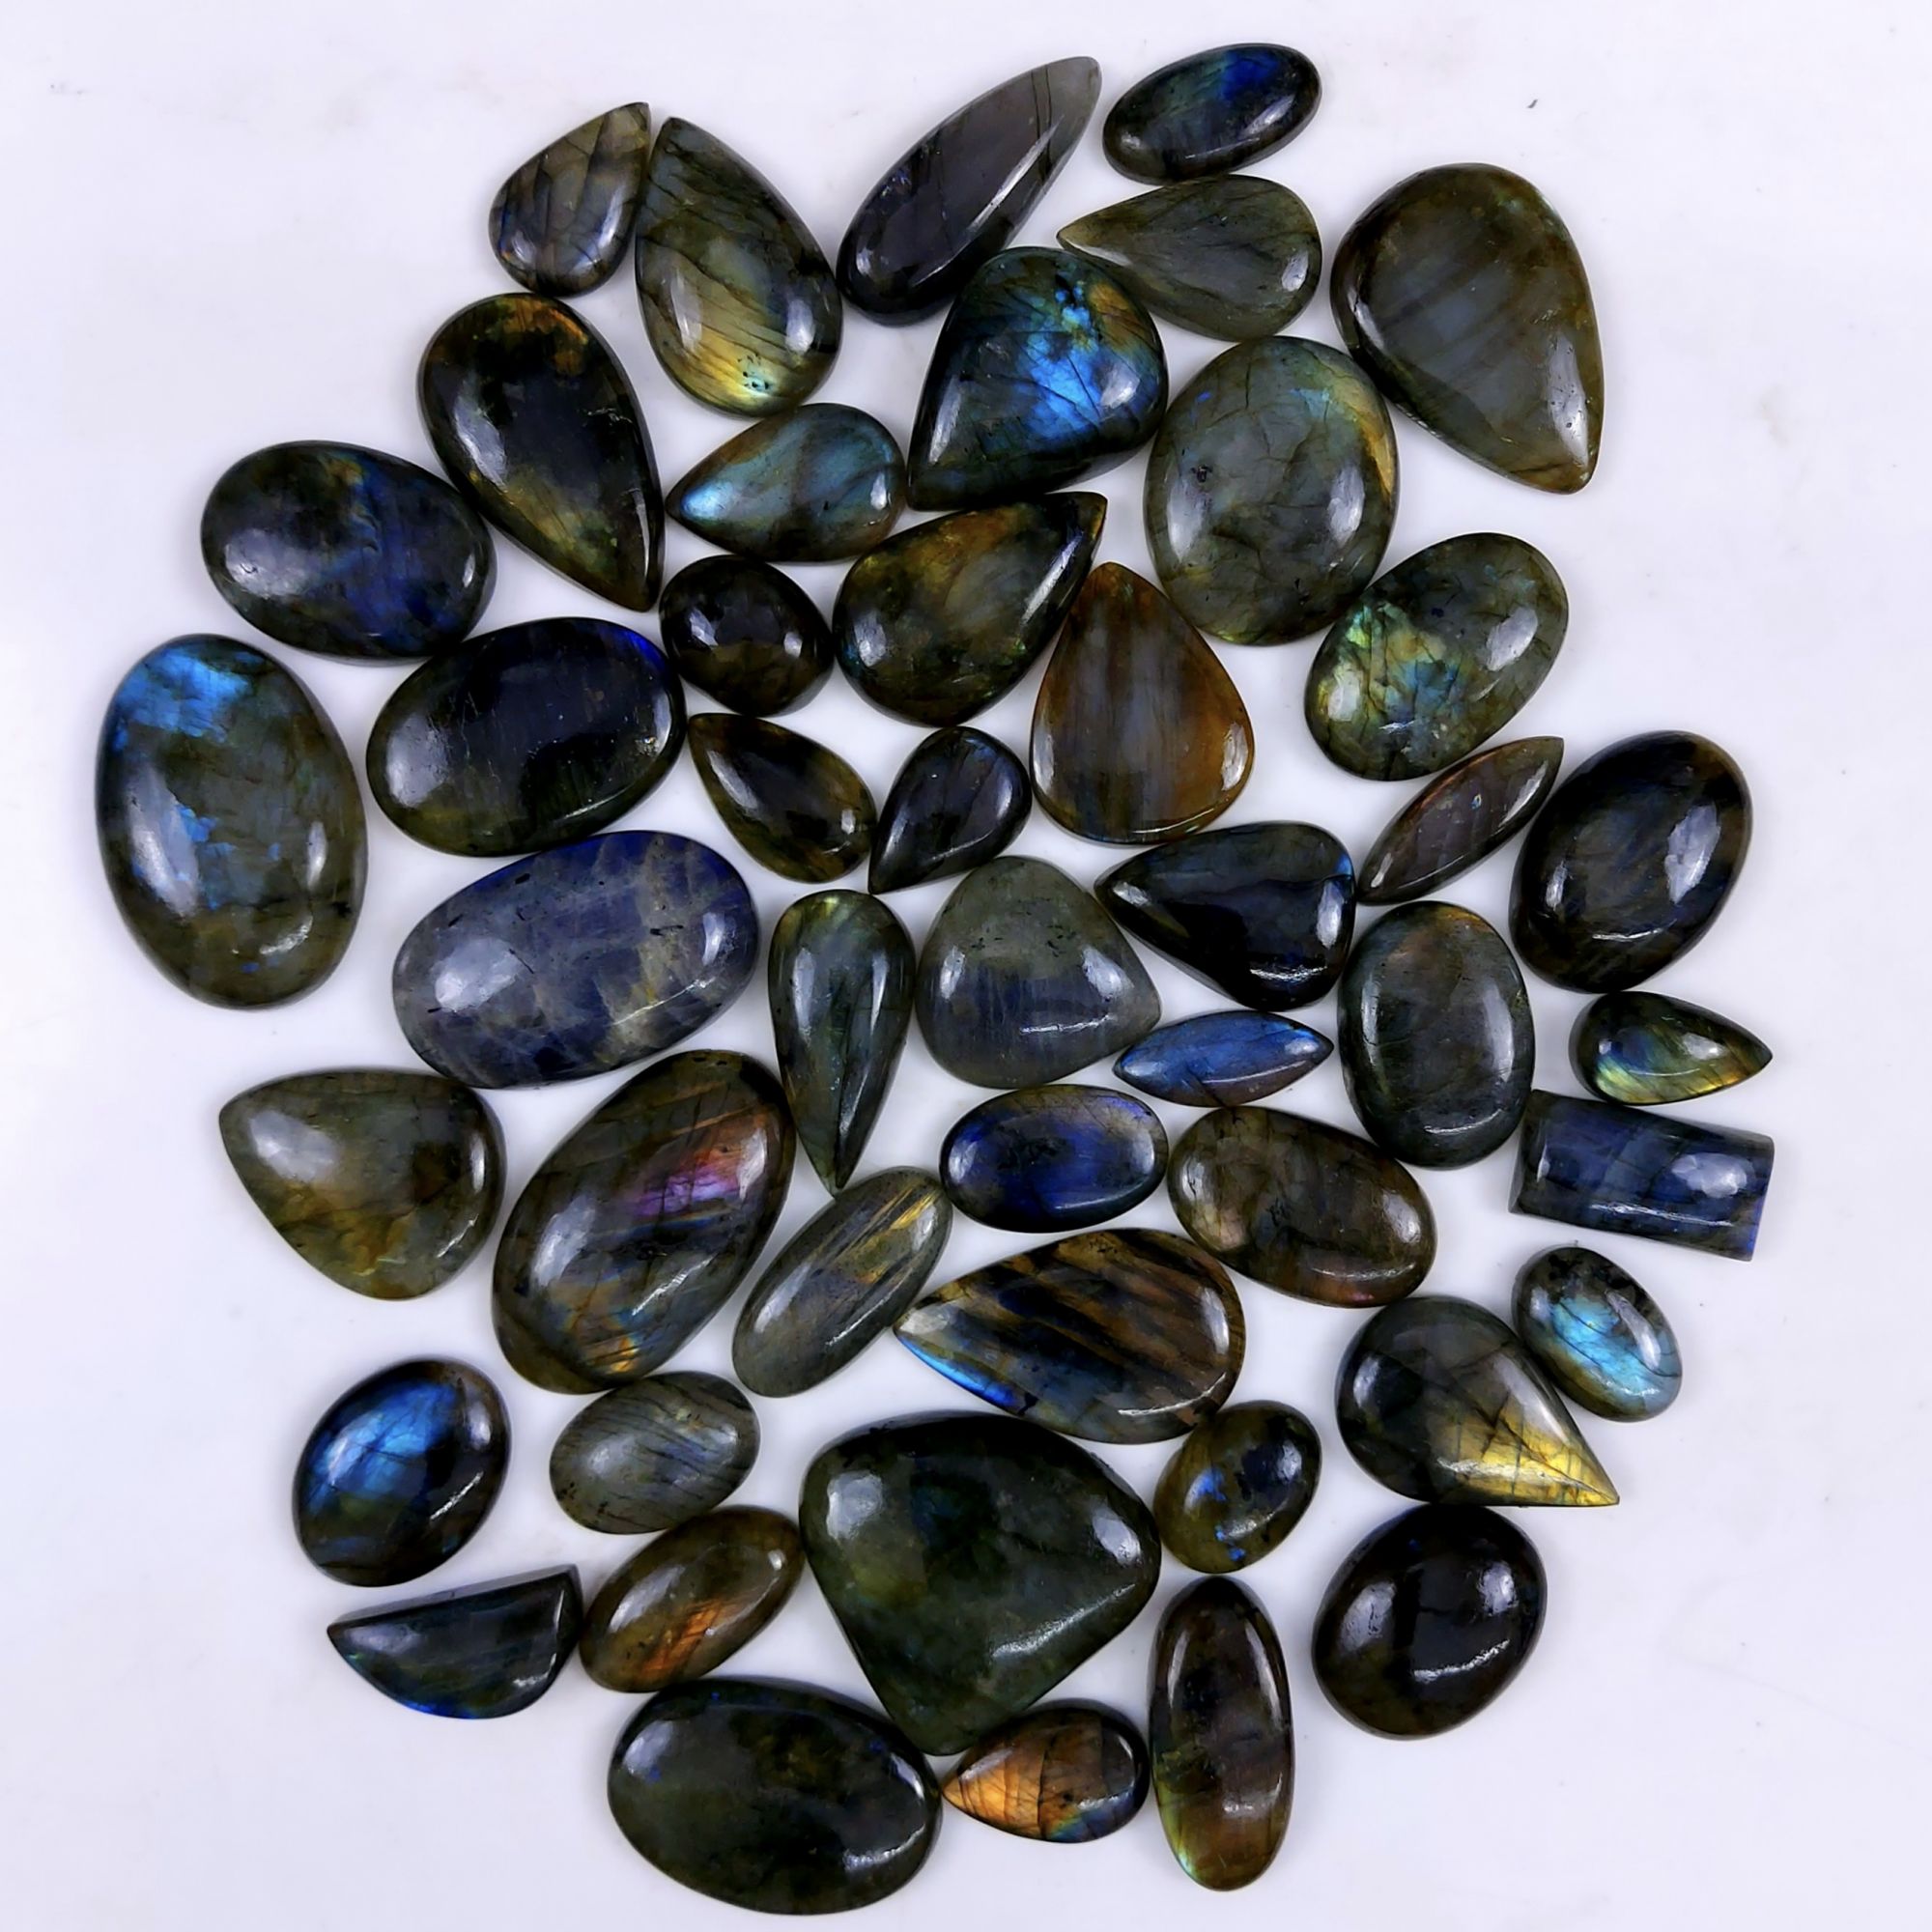 52pc 1683Cts Labradorite Cabochon Multifire Healing Crystal For Jewelry Supplies, Labradorite Necklace Handmade Wire Wrapped Gemstone Pendant 52x26 18x10mm#6382